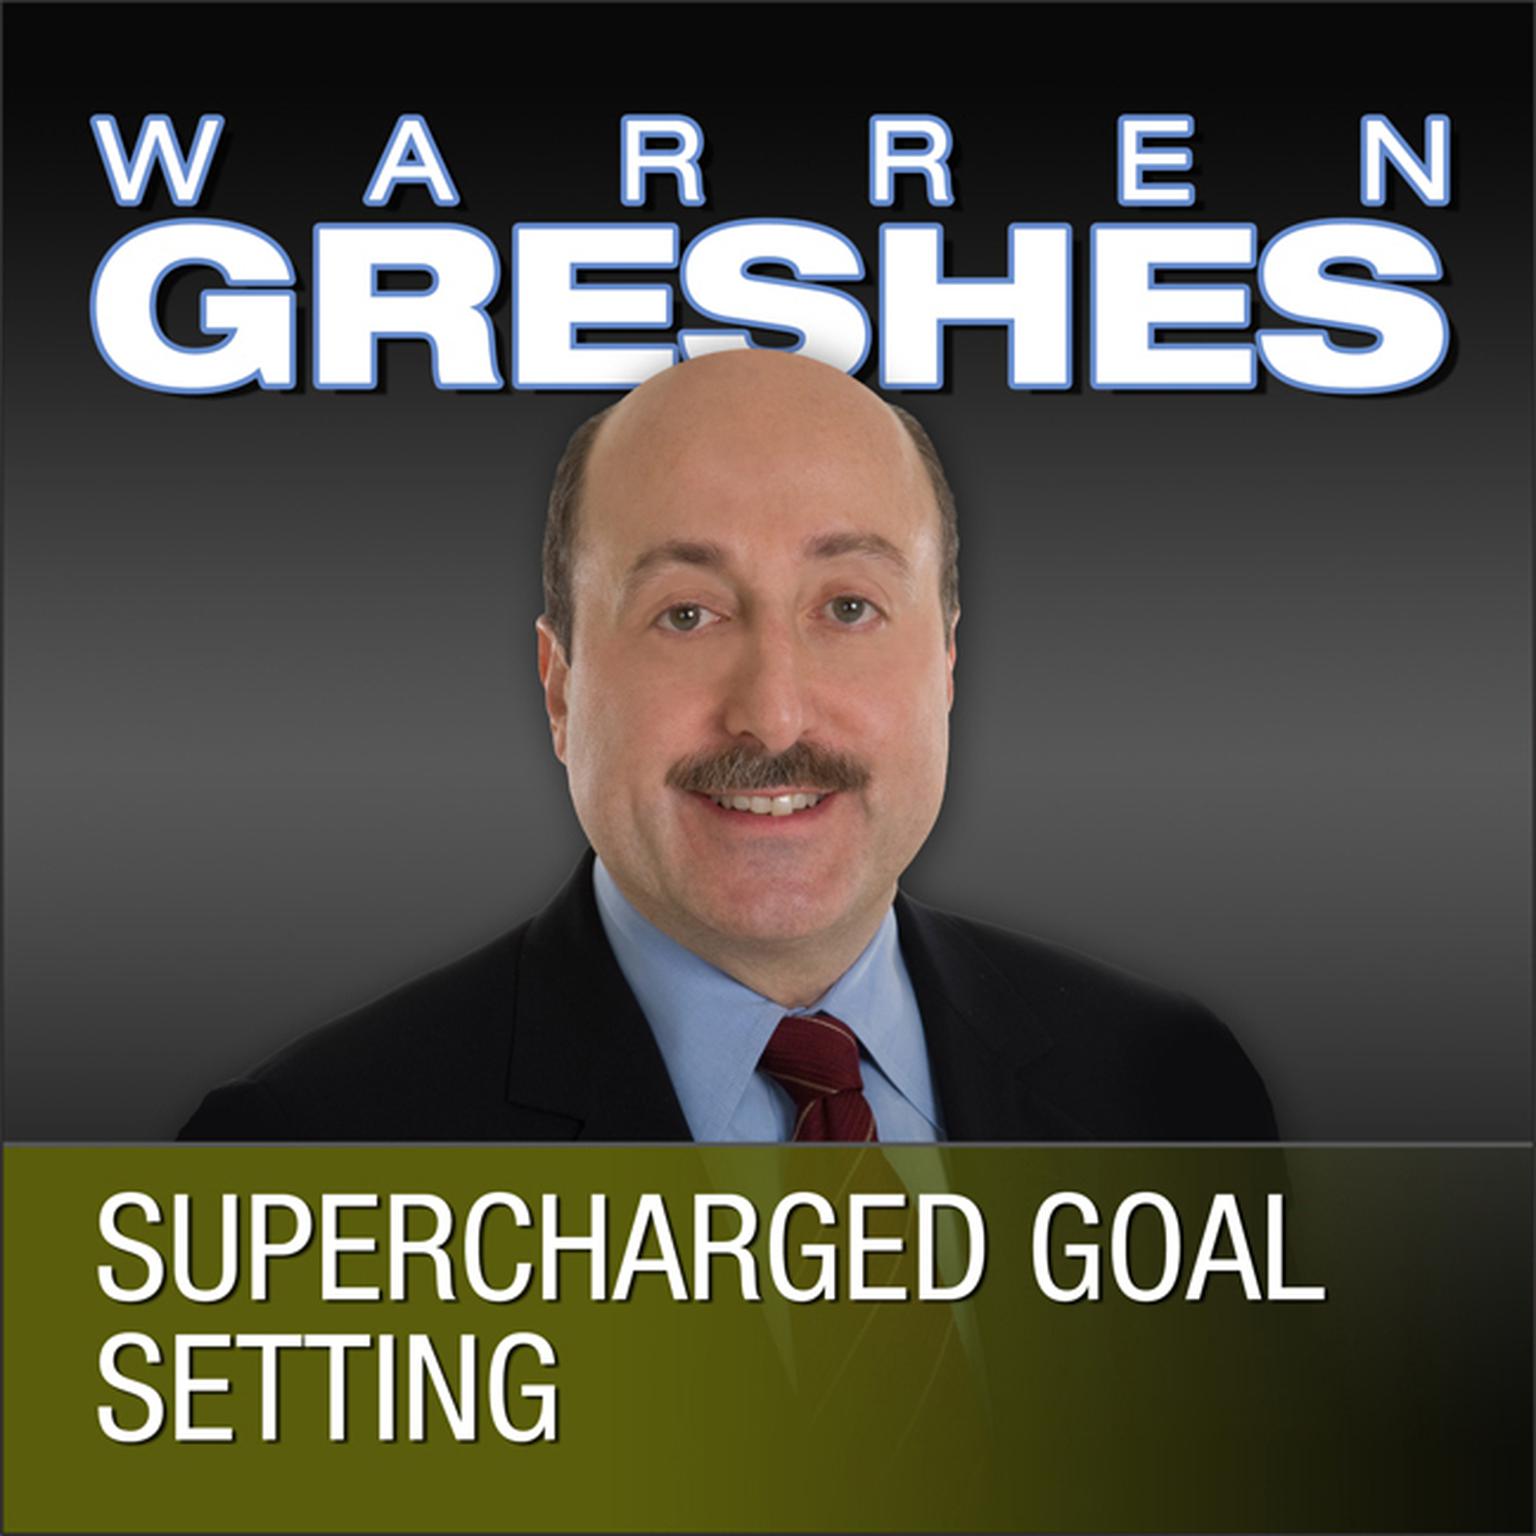 Supercharged Goal Setting: A No-Nonsense Approach to Making Your Dreams a Reality Audiobook, by Warren Greshes